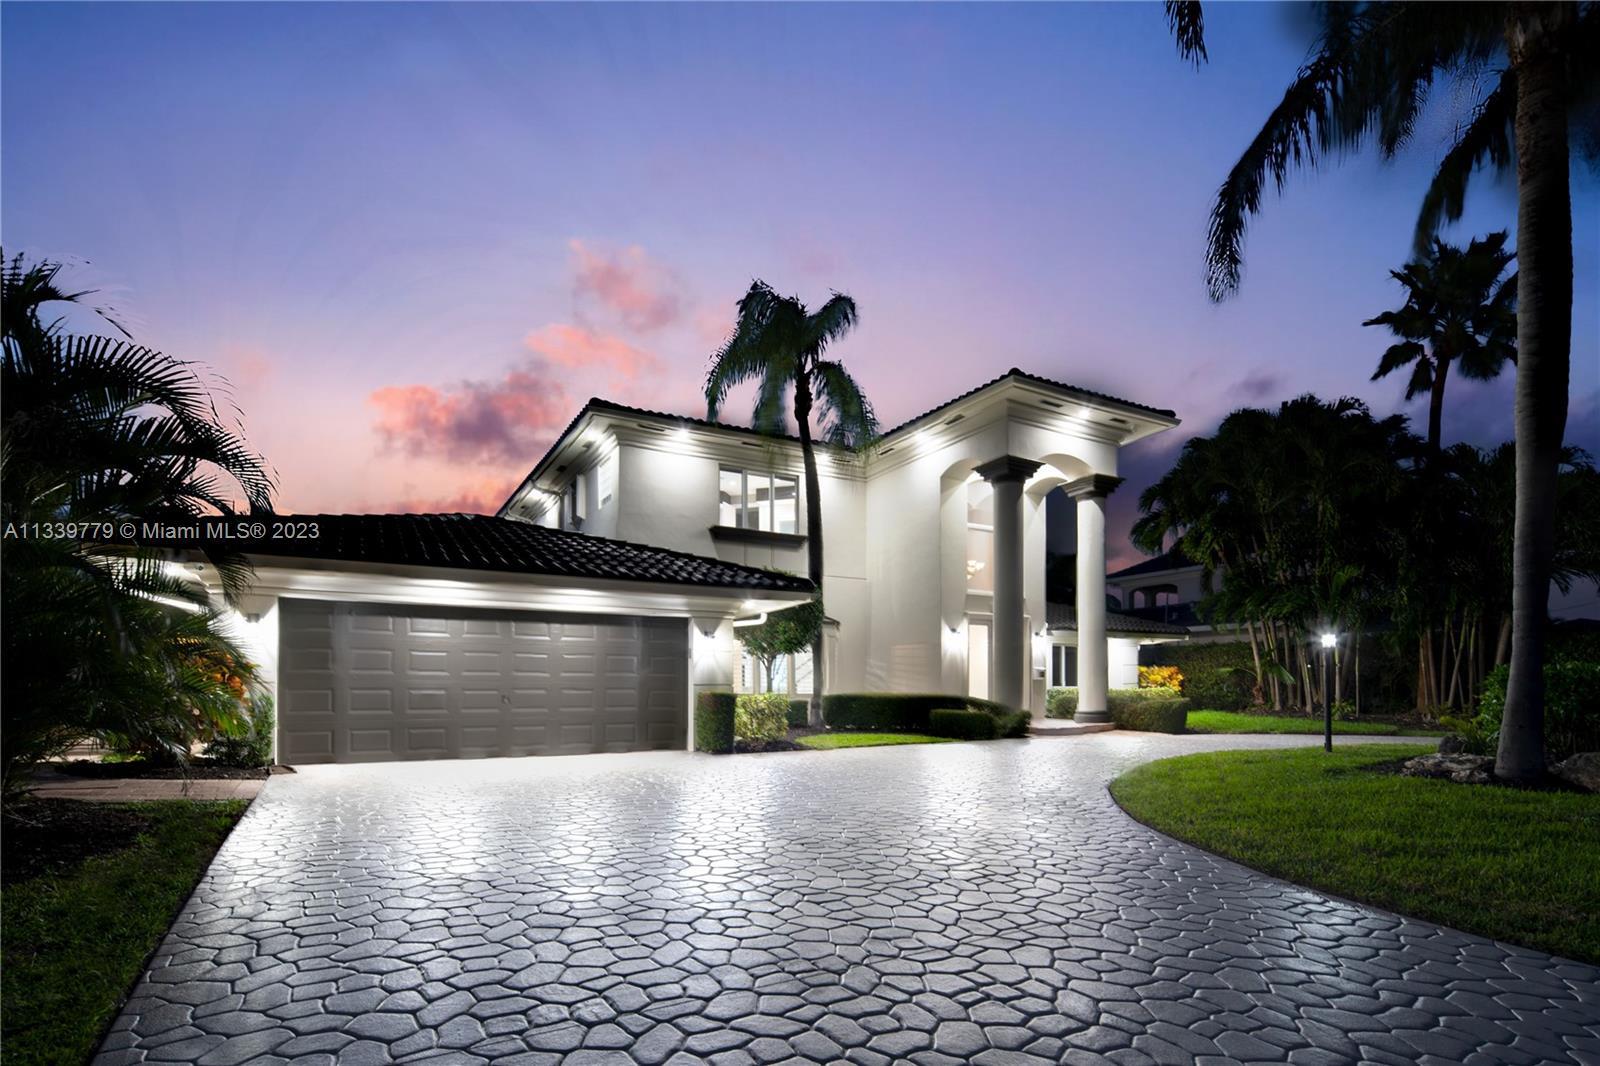 Fully transformed in 2022 into a luxurious waterfront home with contemporary design & 100 feet of wa